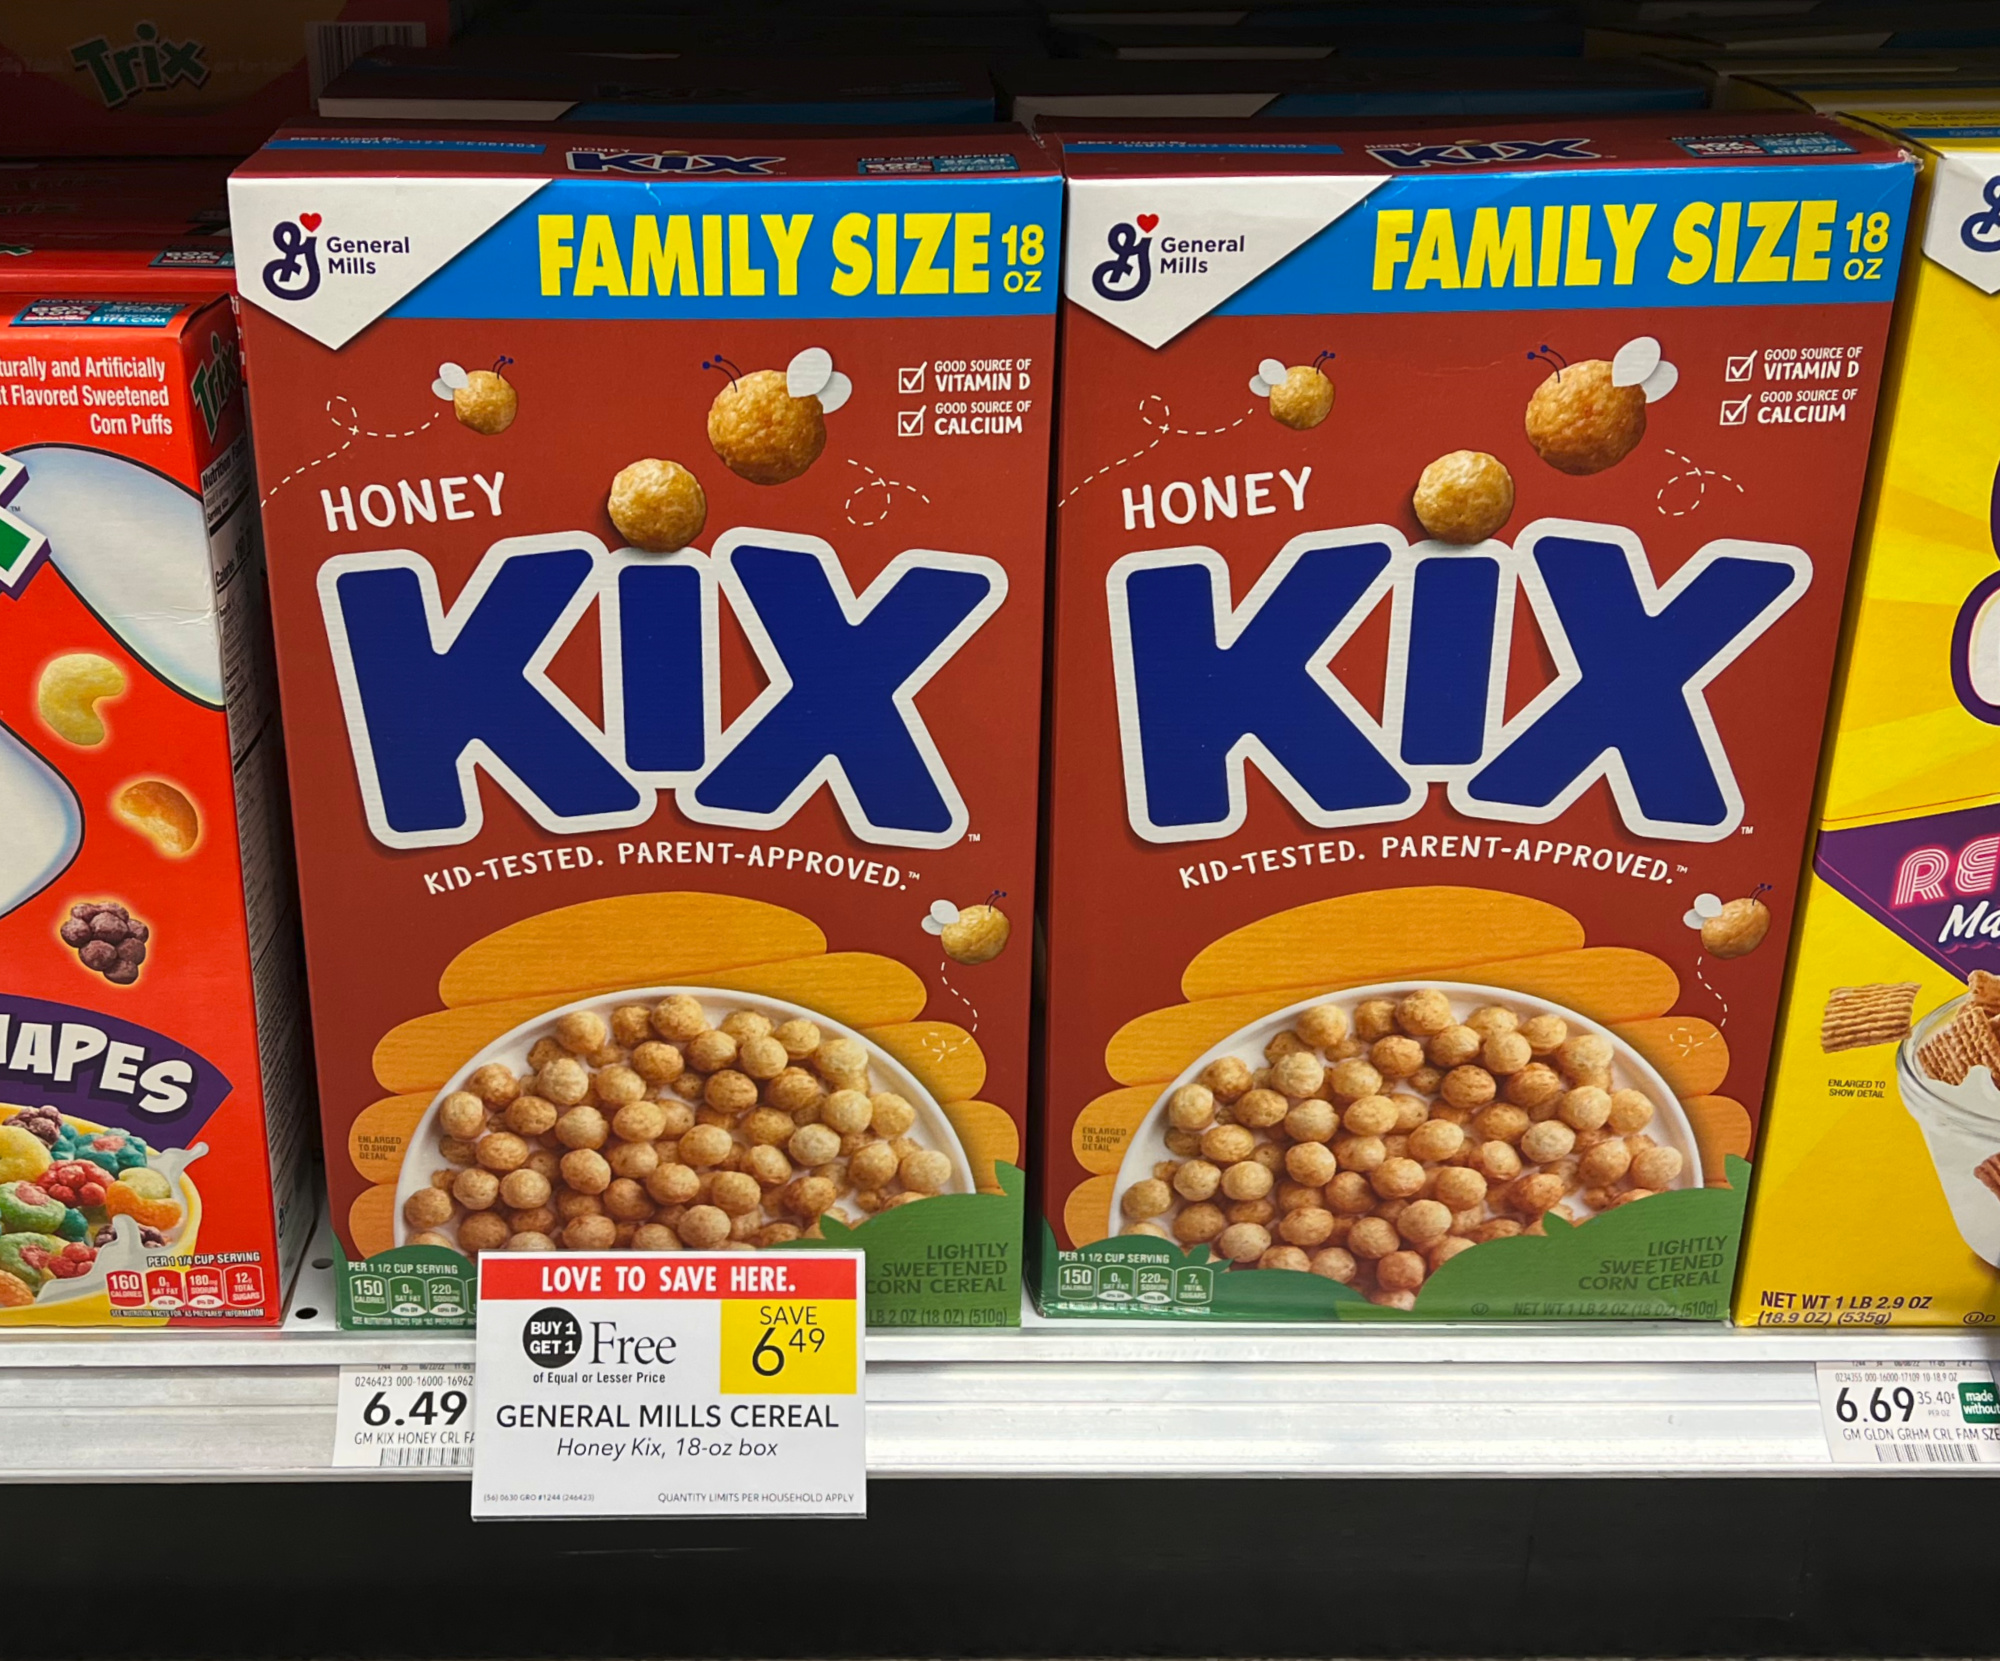 General Mills Cereal As Low As $2.75 At Publix - iHeartPublix